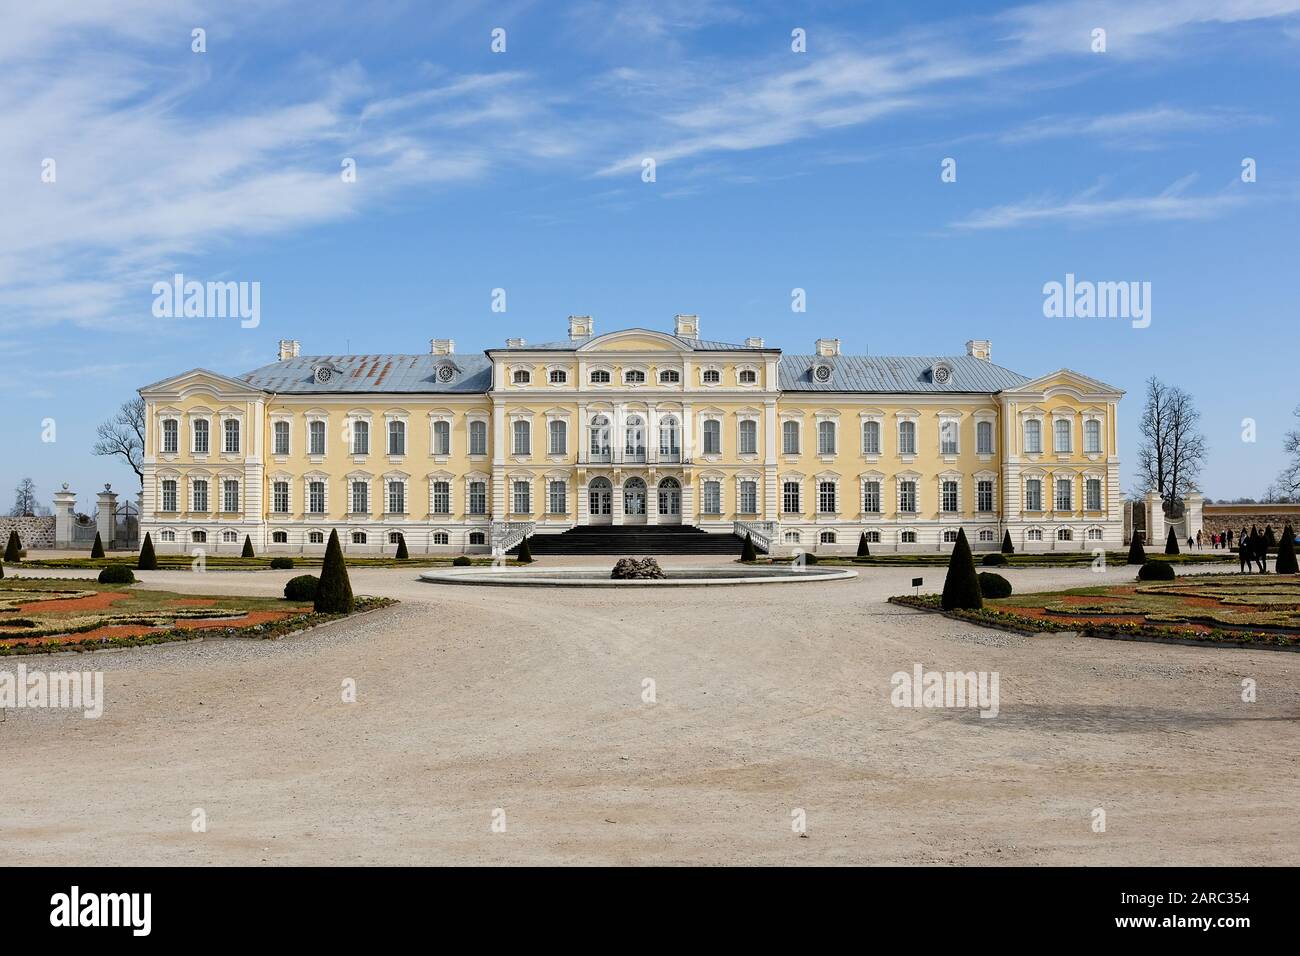 Wide angle view of Rundale Palace in Latvia against blue sky Stock Photo